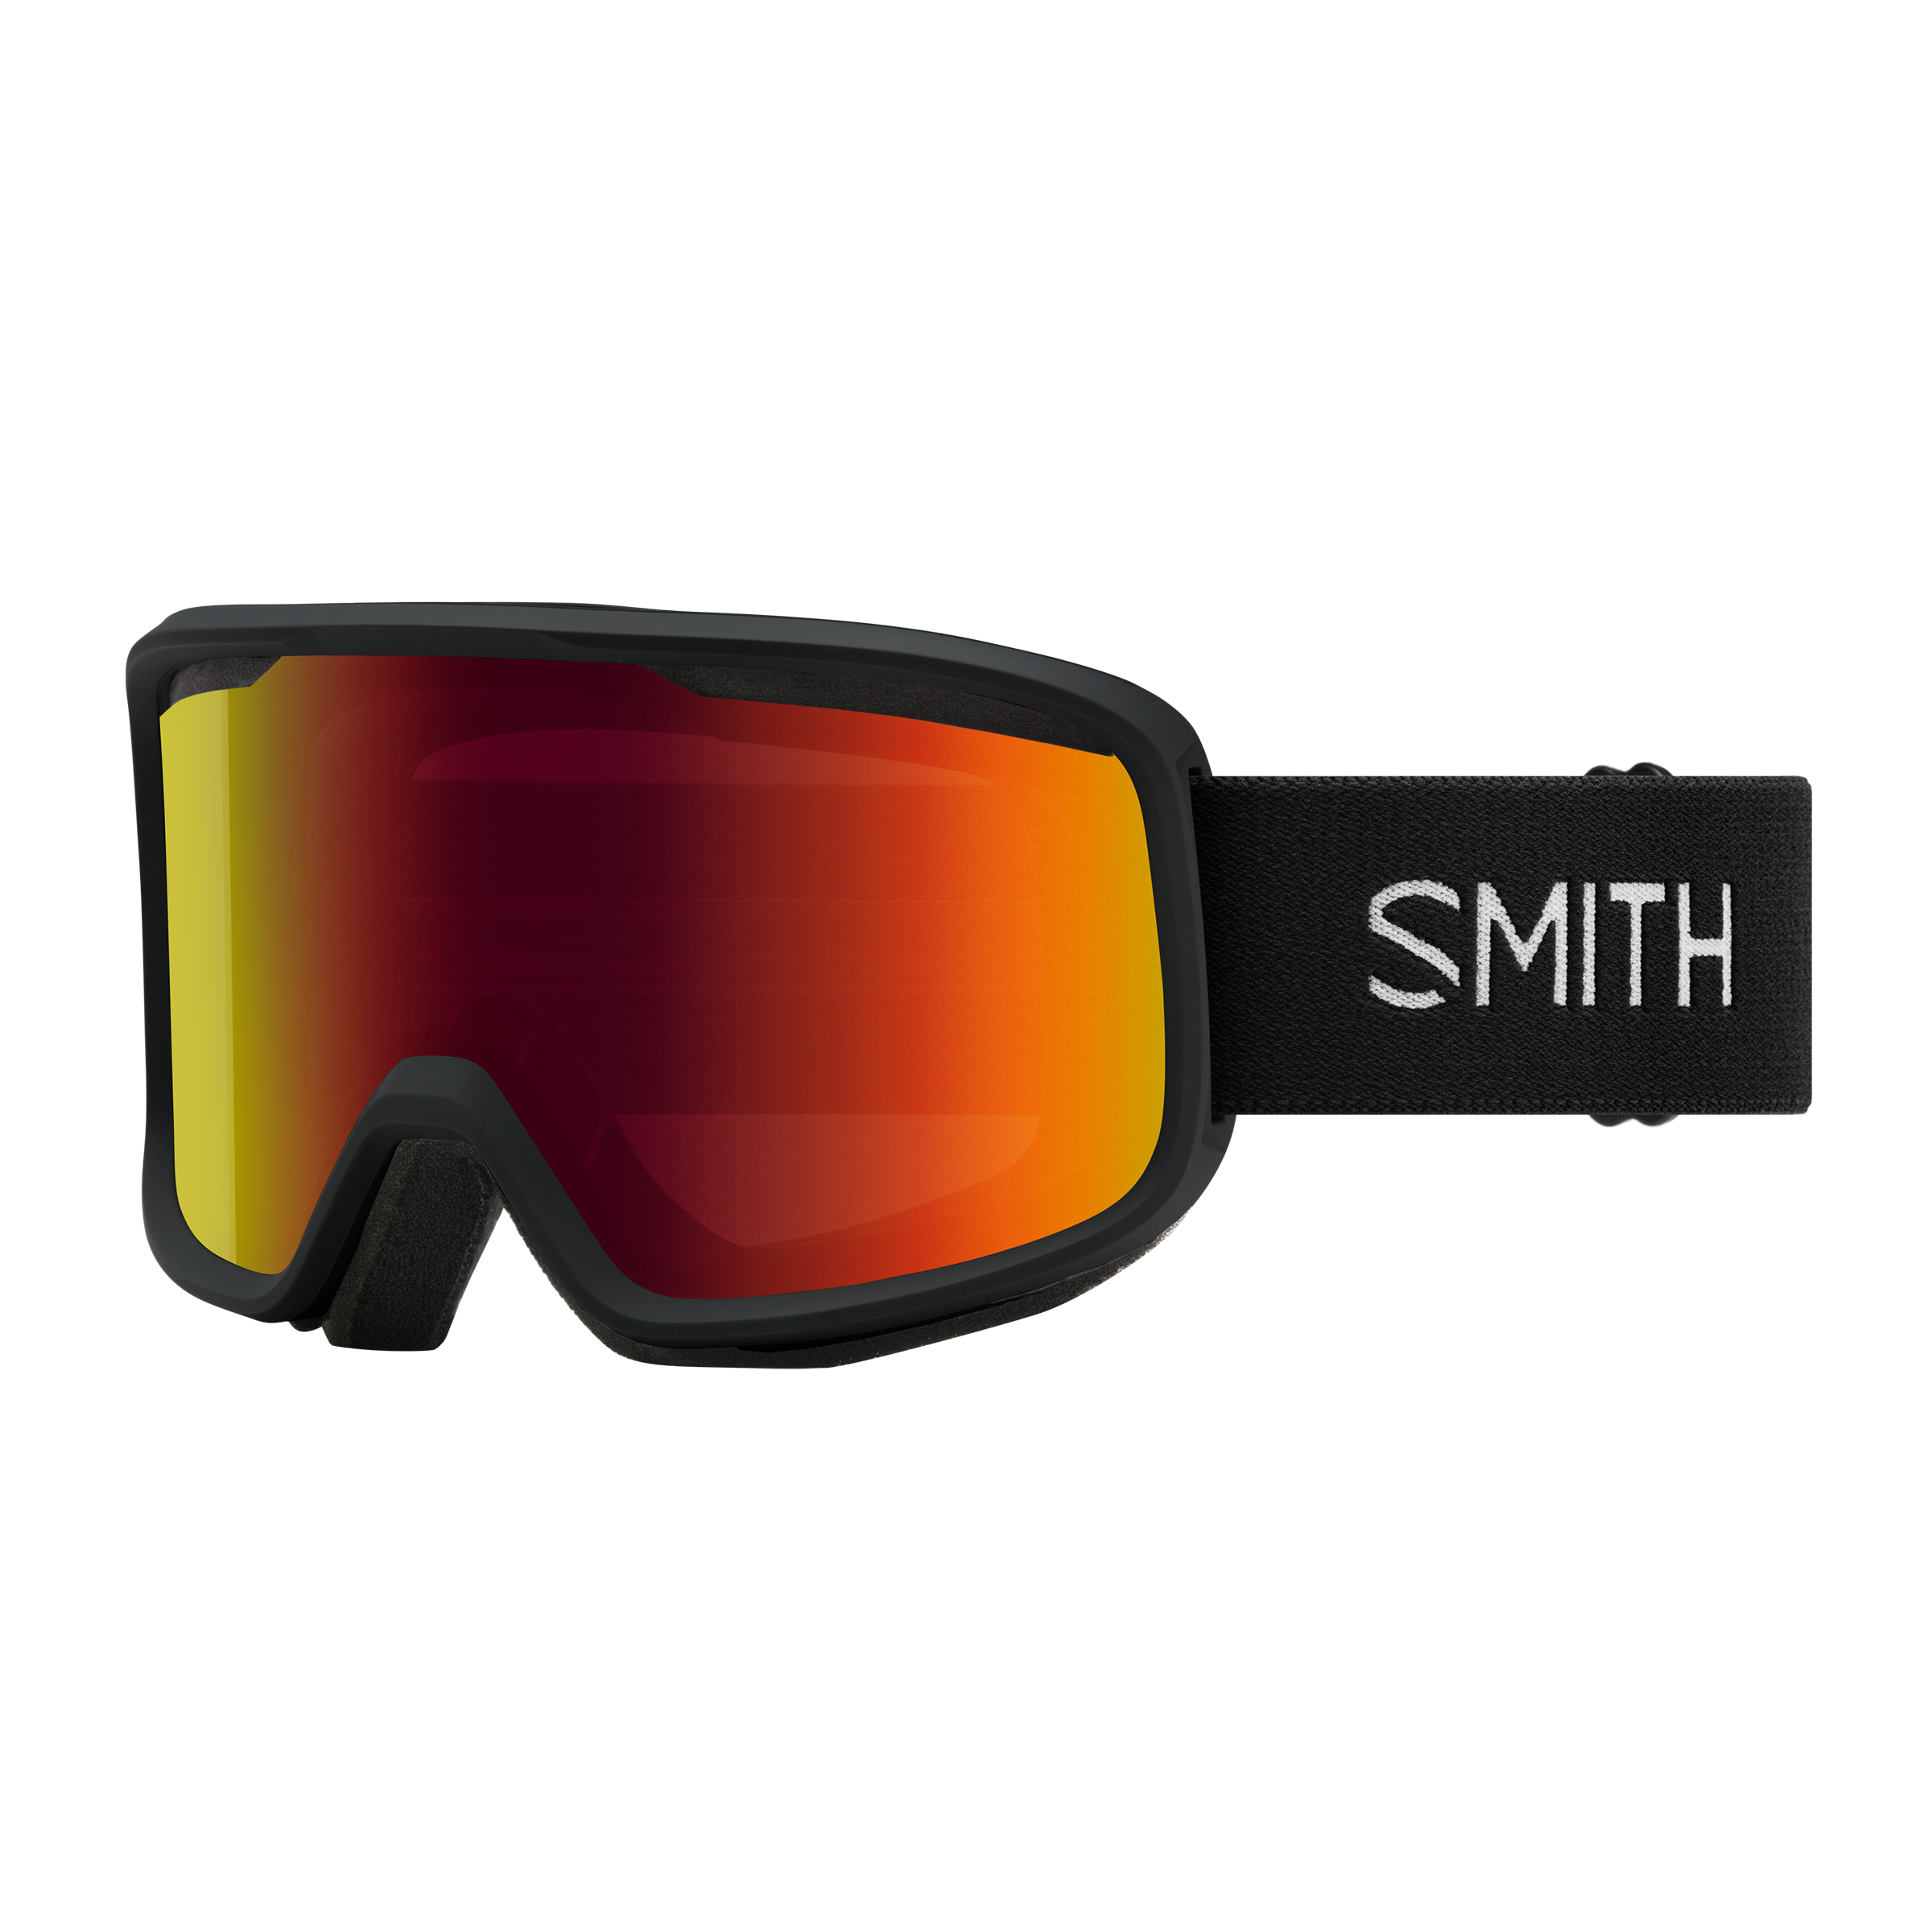 Frontier Asia Fit | Smith Optics | US